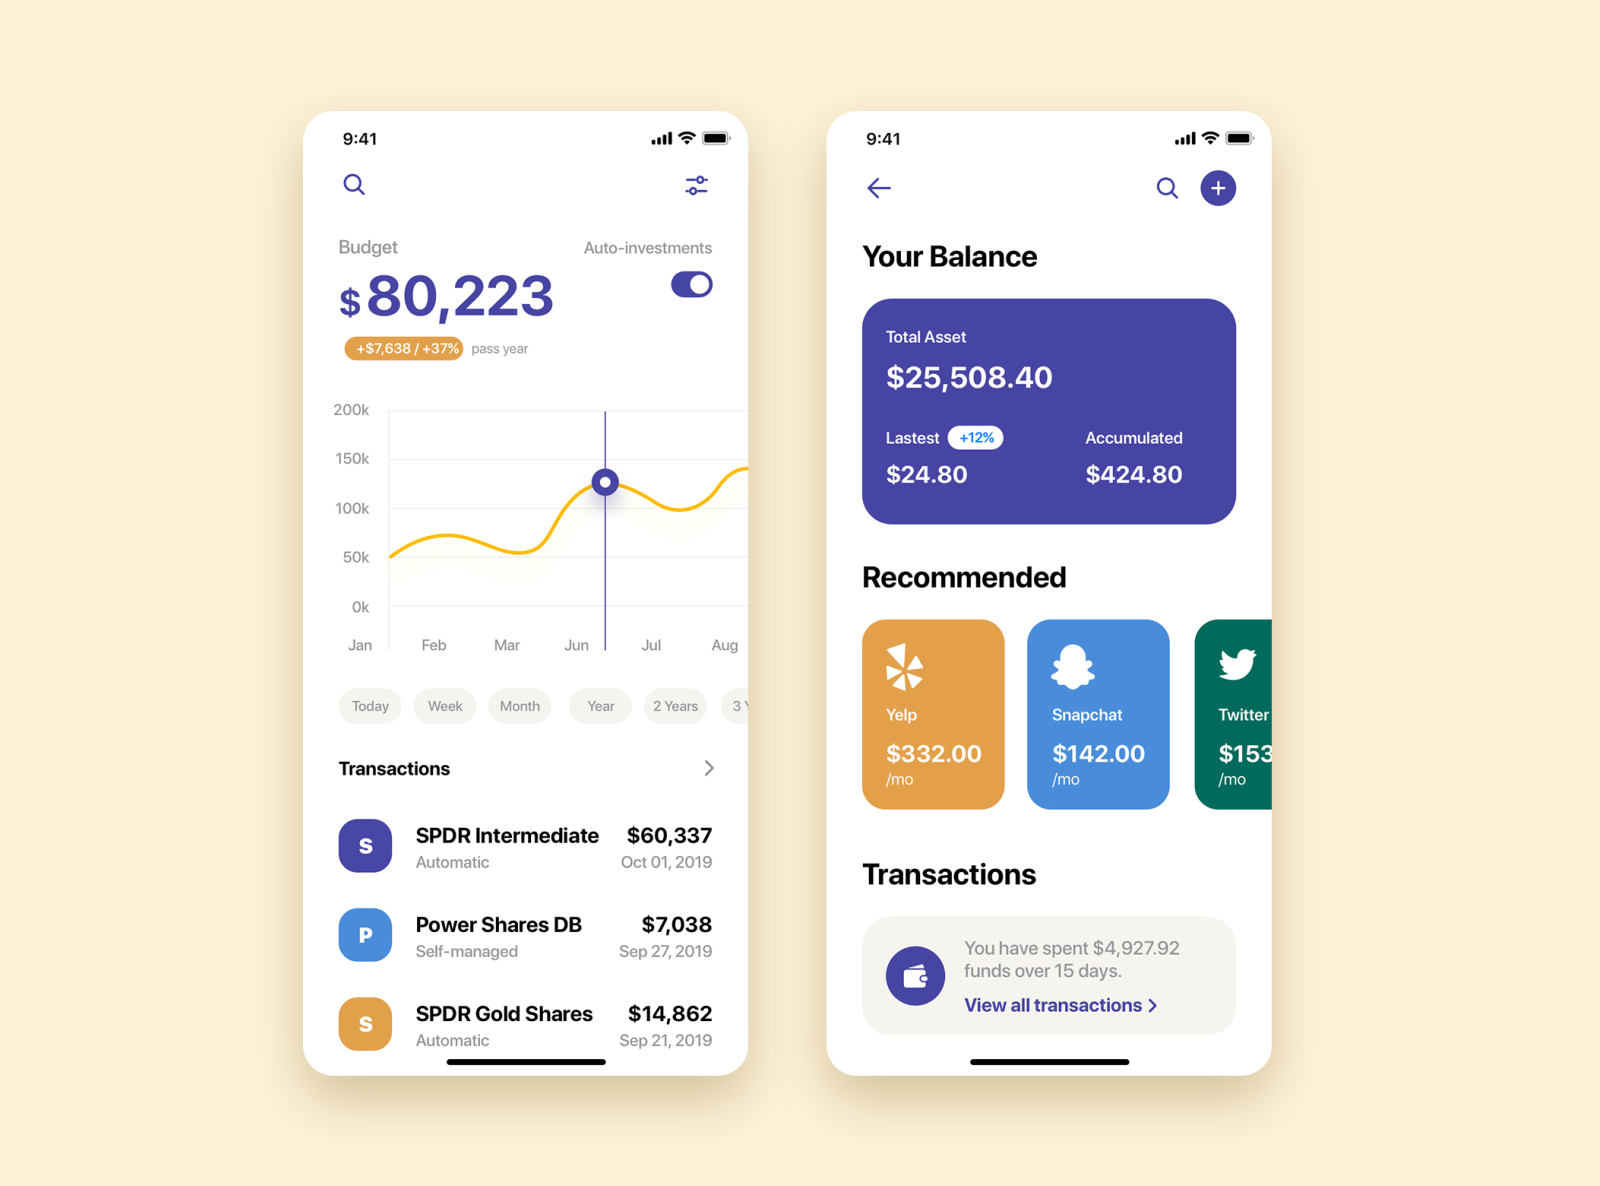 My Wallet Mobile App Ui Kit Template By Hoangpts On Dribbble